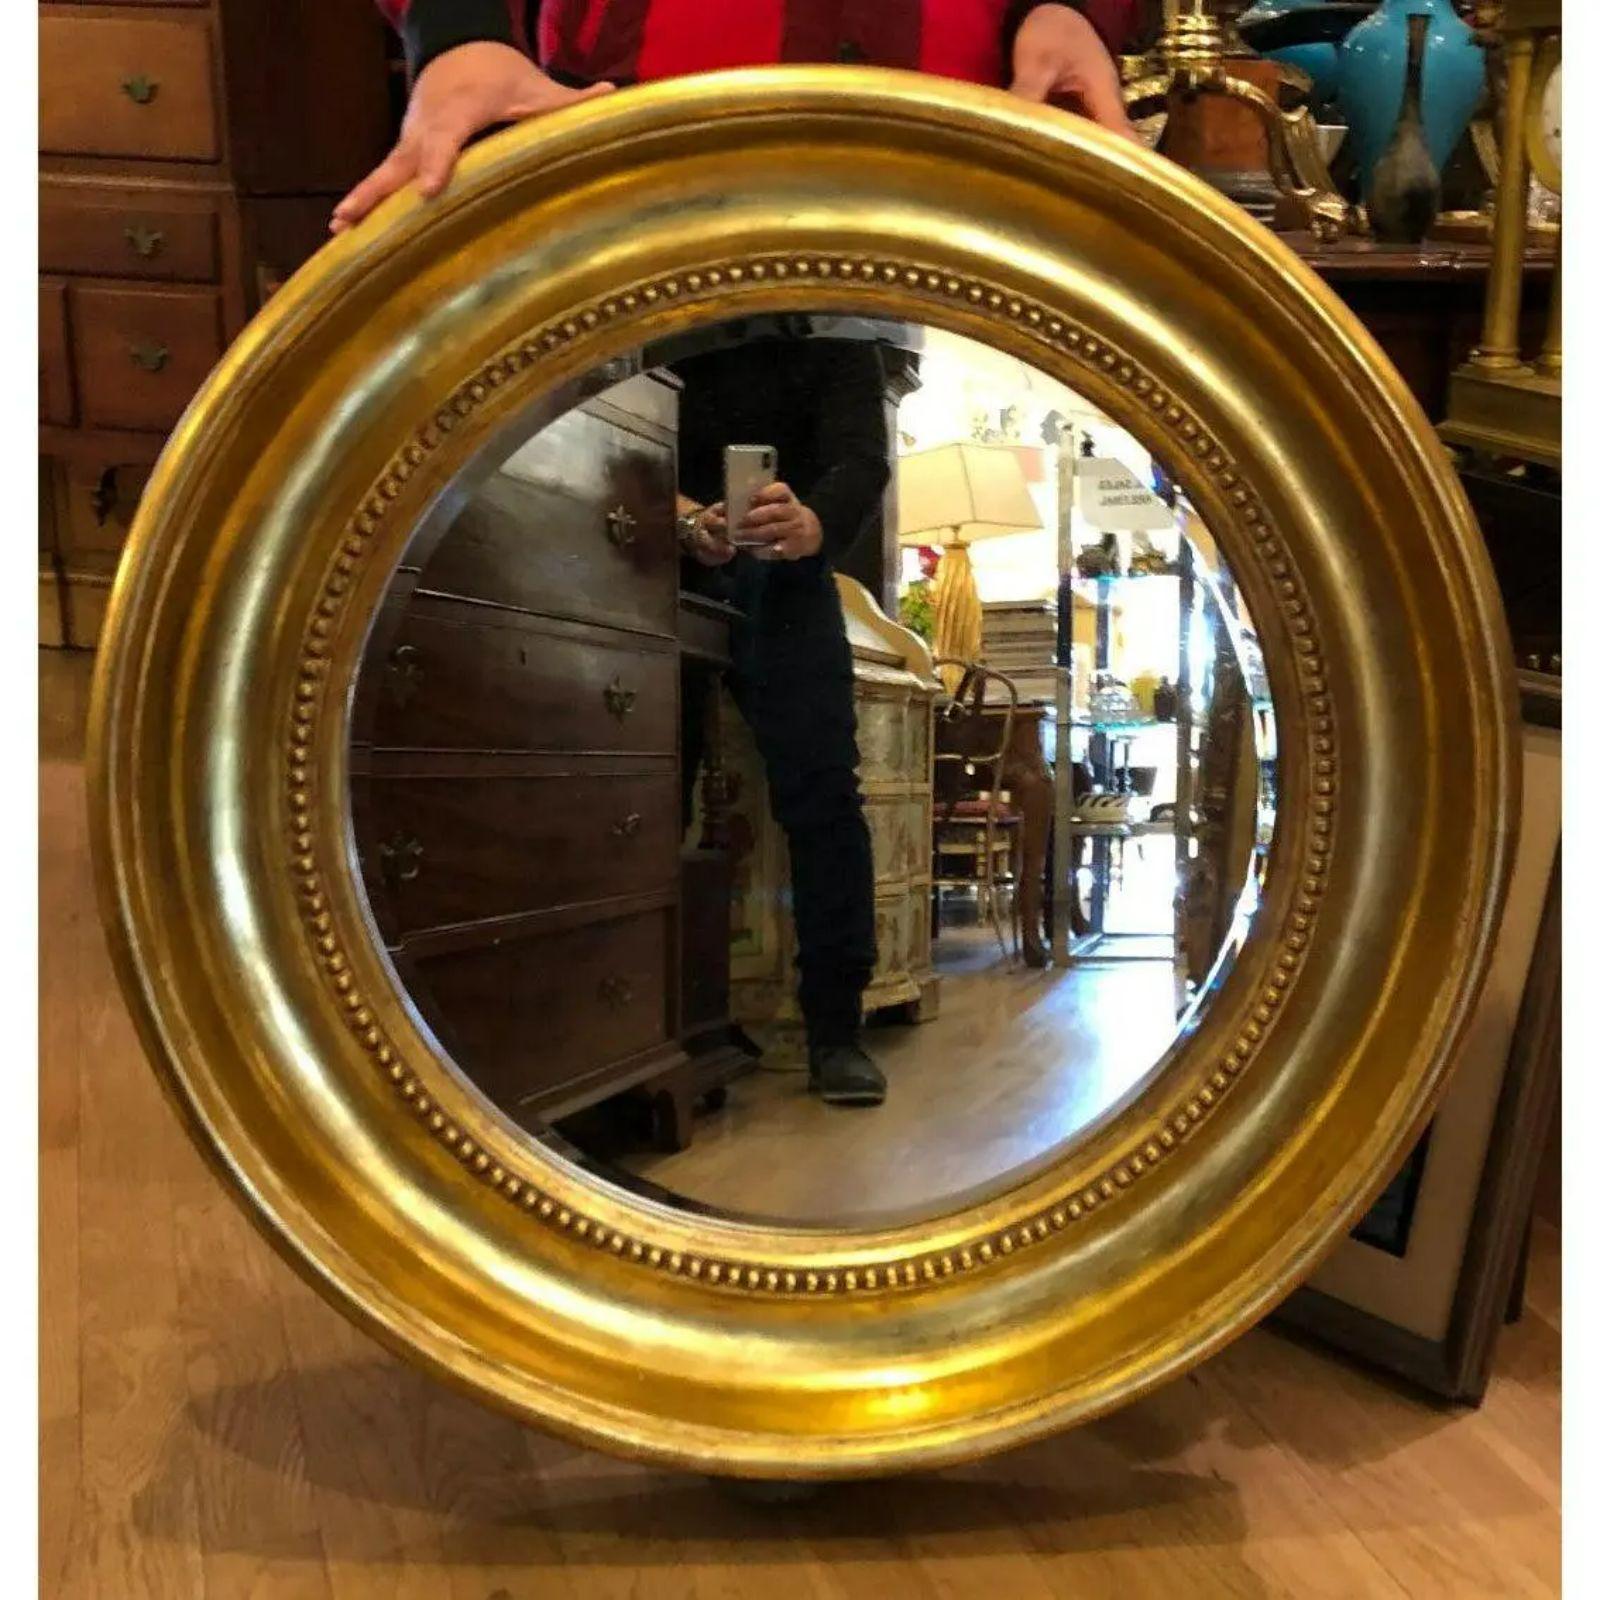 Round Empire style gold mirror by Randy Esada Designs. Beautiful gold gilding and beveled mirror.

Additional information: 
Materials: Giltwood, Gold, Mirror
Color: Gold
Brand: Randy Esada Designs for Prospr
Designer: Randy Esada Designs for